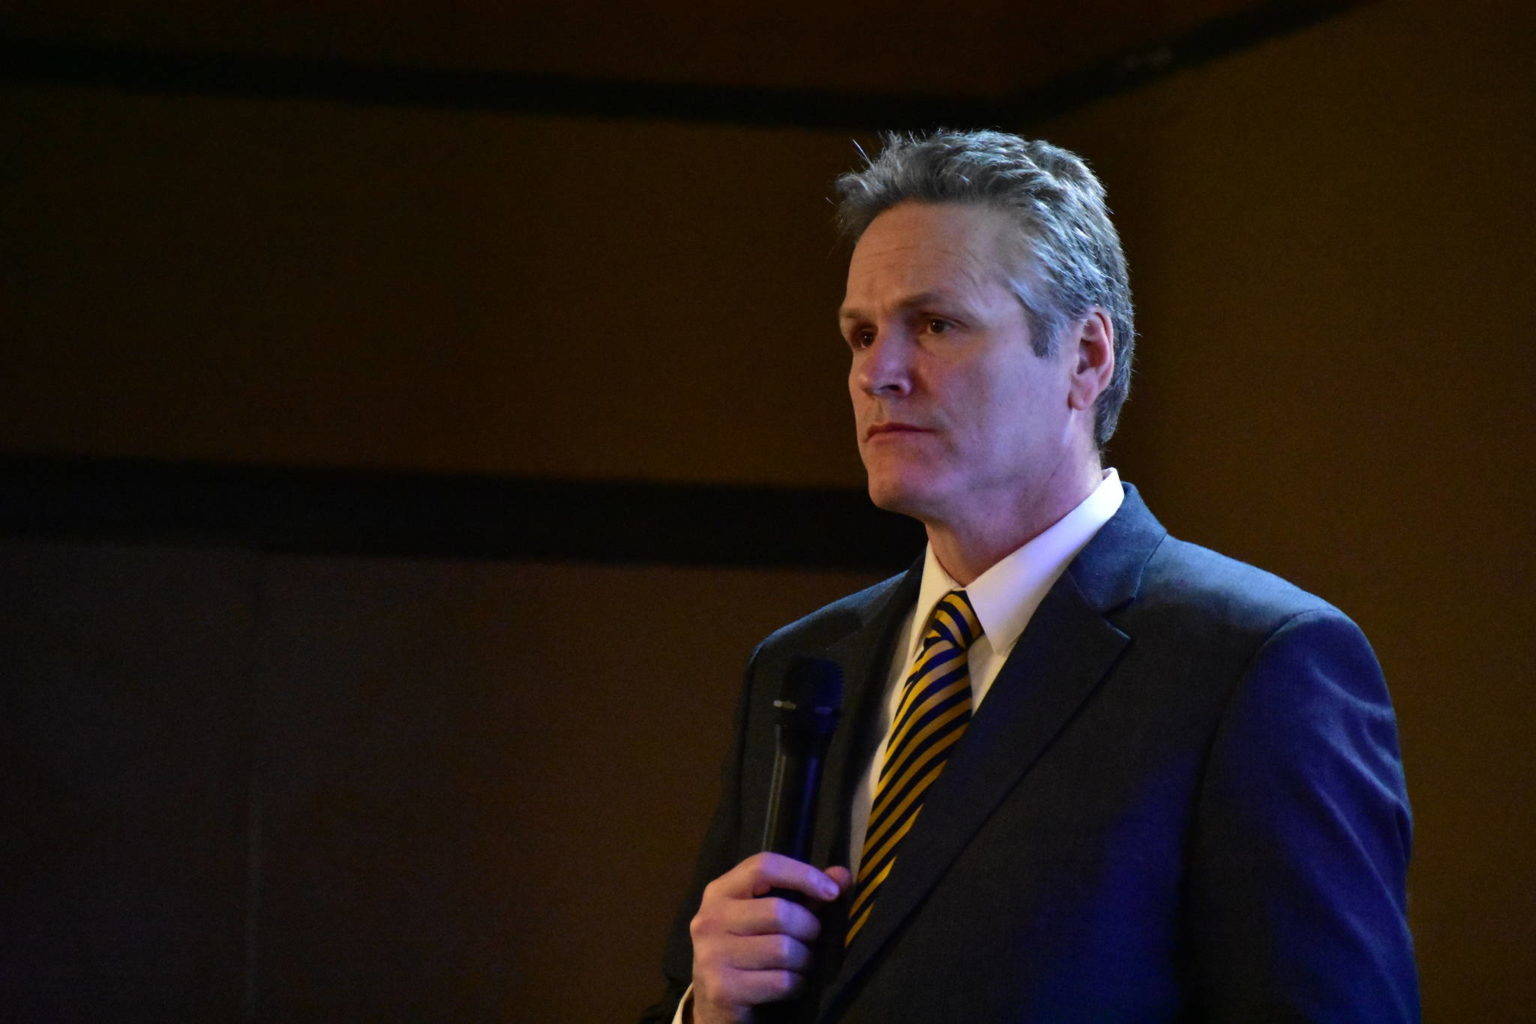 Gov. Mike Dunleavy speaks to local leaders at the Alaska Municipal League’s legislative conference in this February 2020 photo. Dunleavy issued a statement regarding a lawsuit out of Texas seeking to overturn the results of the presidential election. (Peter Segall/ Juneau Empire File)